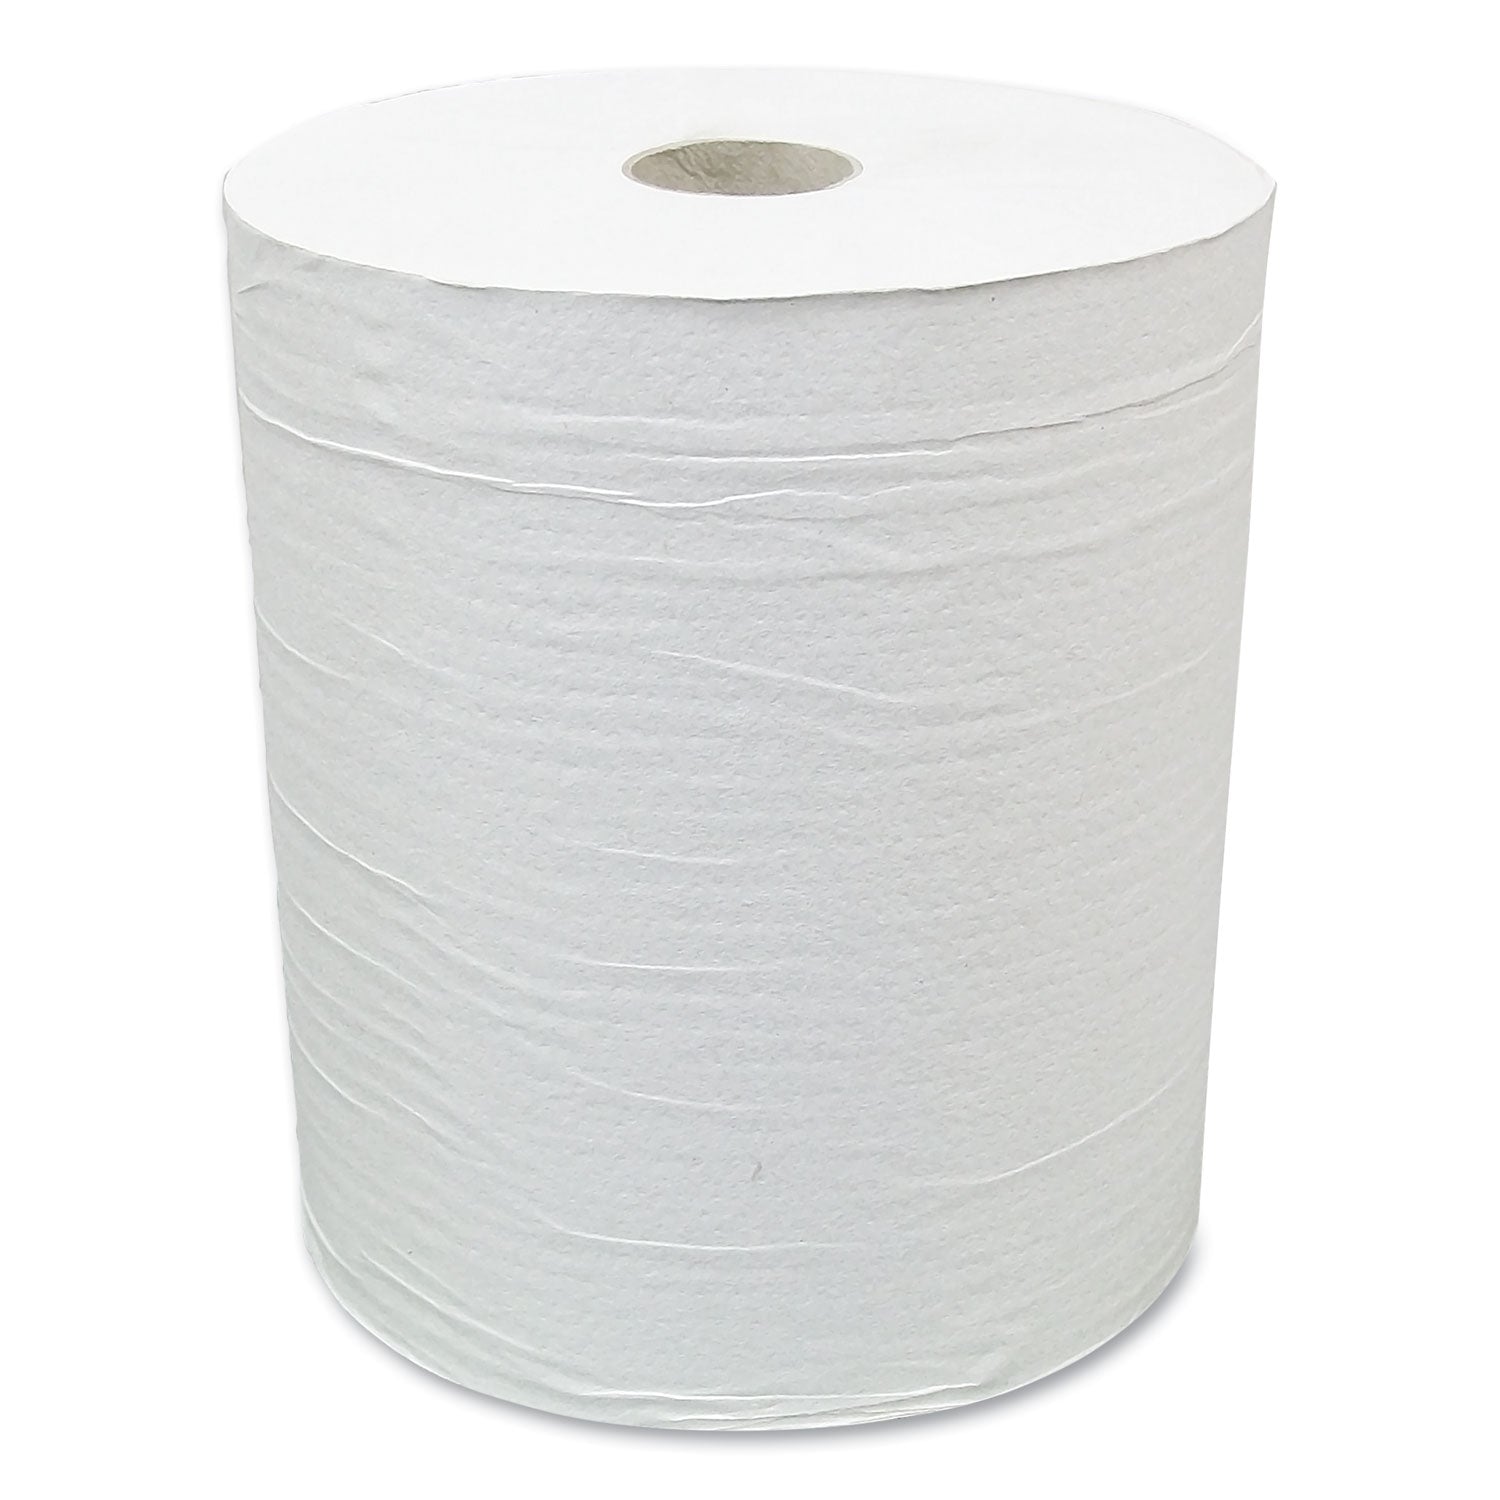 hardwound-paper-towel-roll-eco-green-paper-1-ply-788-x-800-ft-white-6-carton_apaen80166 - 1